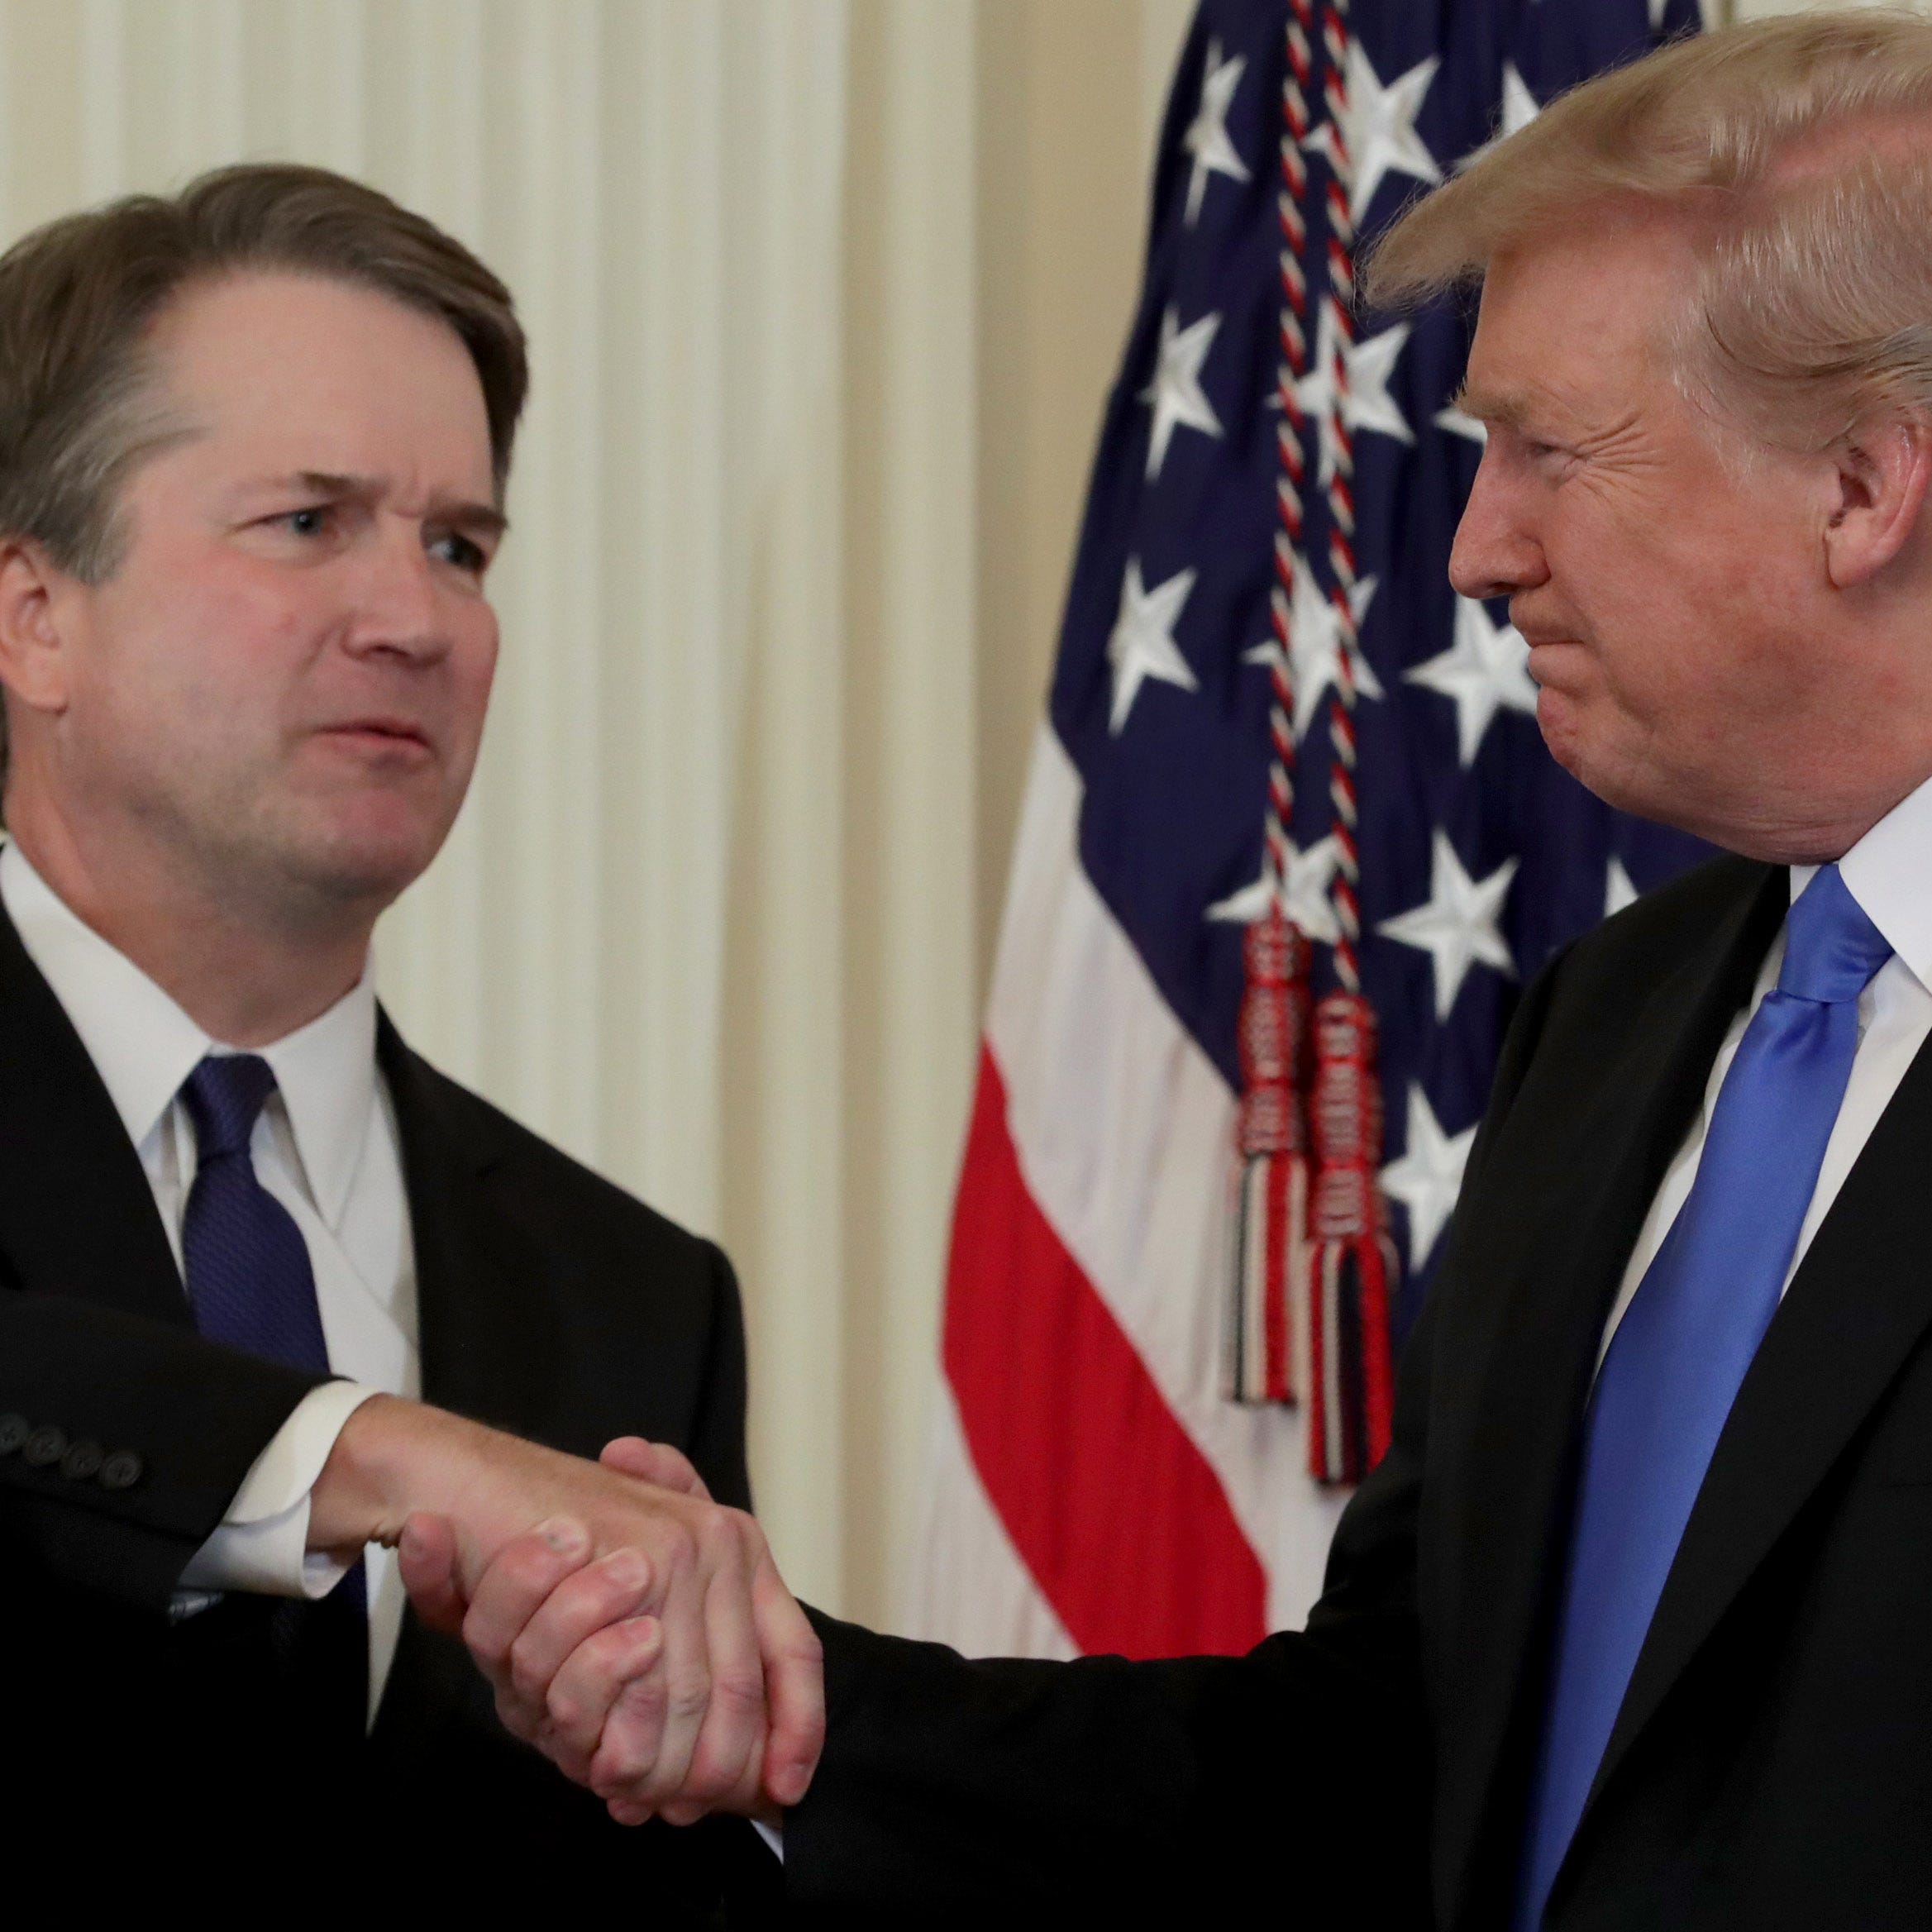 WASHINGTON, DC - JULY 09: U.S. President Donald Trump introduces U.S. Circuit Judge Brett M. Kavanaugh as his nominee to the United States Supreme Court during an event in the East Room of the White House July 9, 2018 in Washington, DC. Pending confi